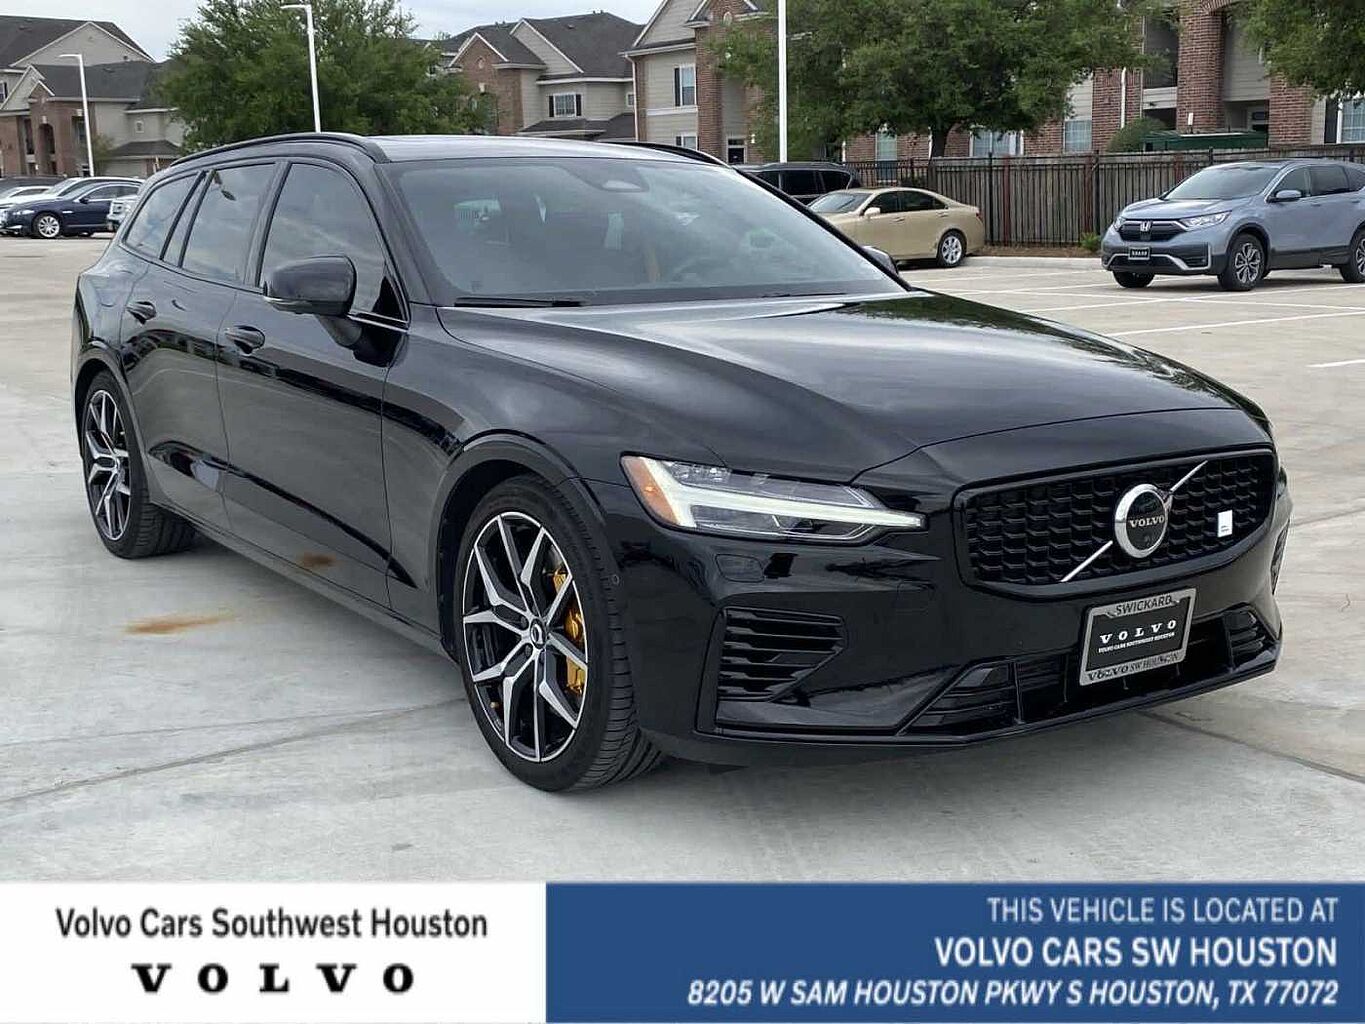 Pre-owned Volvo V60 Cars for Sale on Certified by Volvo | Volvo 